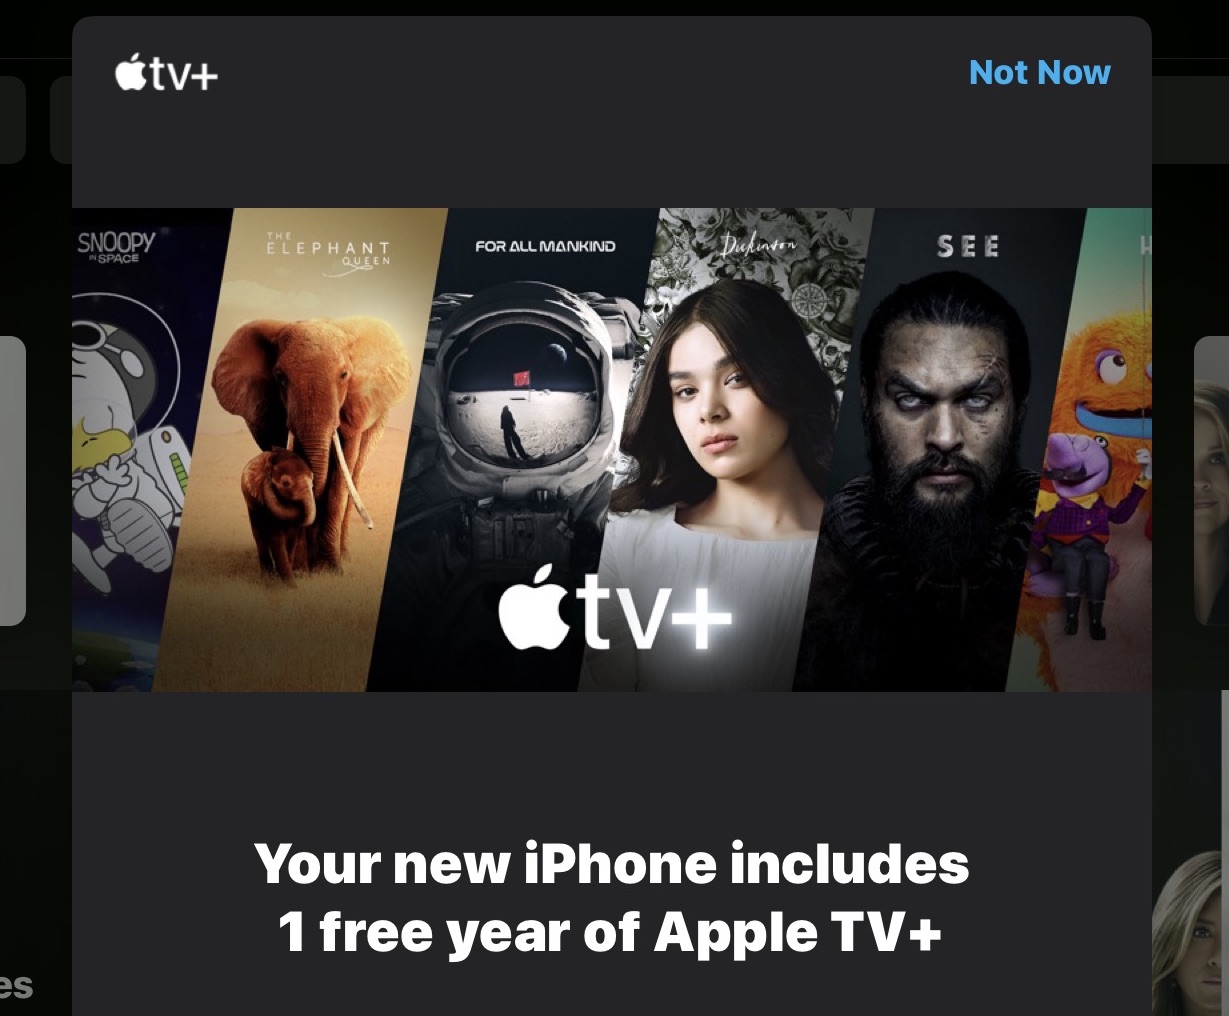 spisekammer filter Brandmand How to Sign Up for Free Apple TV+ Subscription for 1 Year | OSXDaily